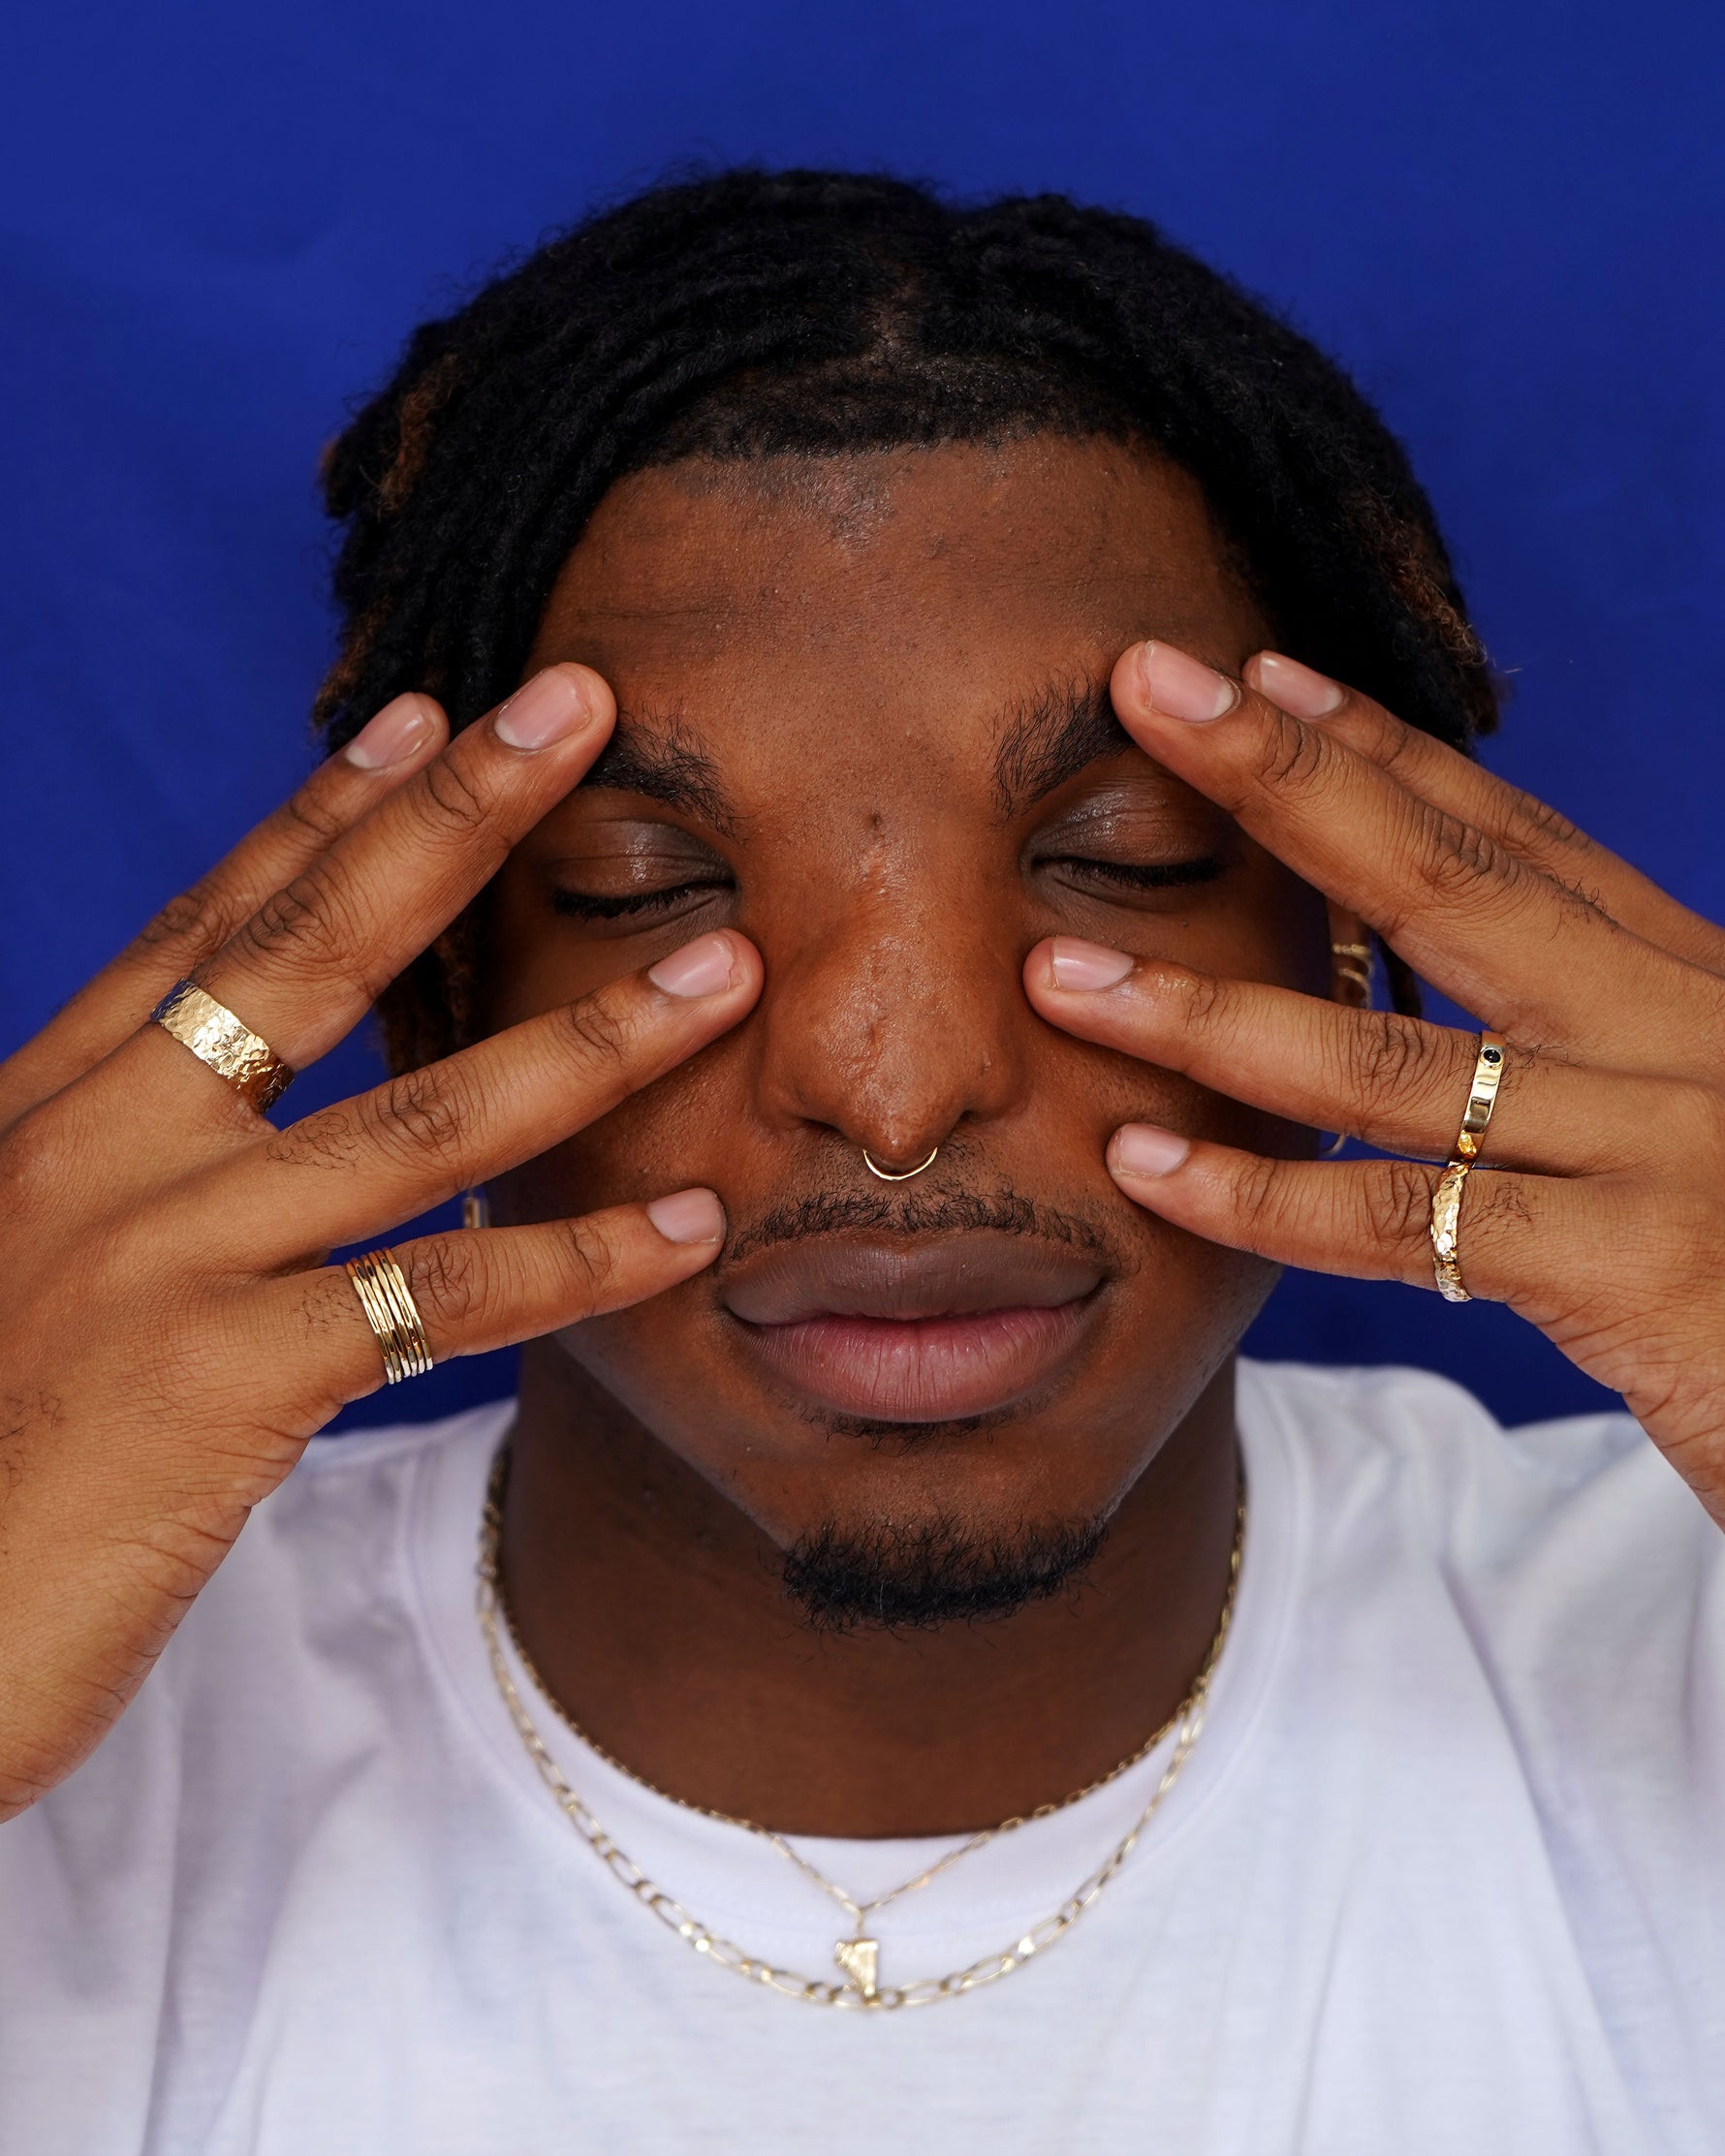 A model with both hands gently touching around their eyes wearing yellow gold rings, earrings, and a septum ring